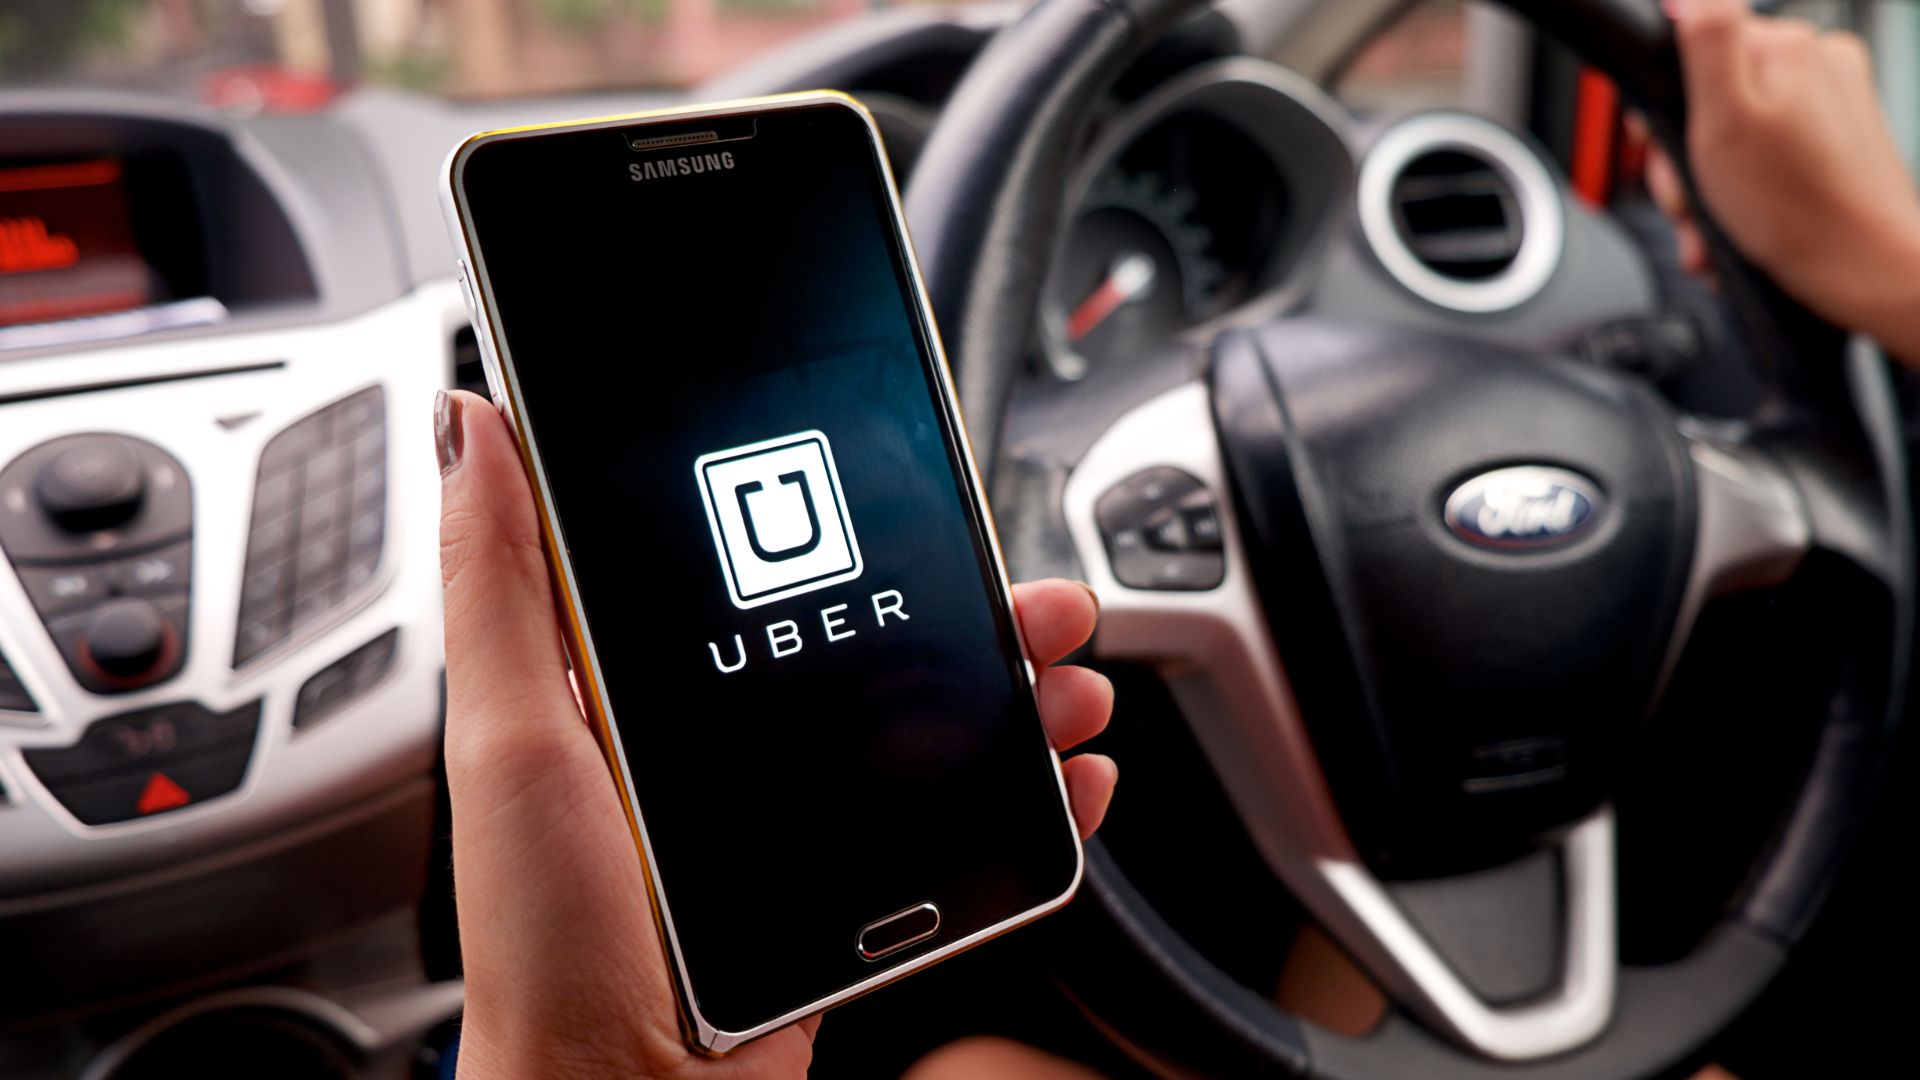 Uber could suspended accounts of people infected with coronavirus